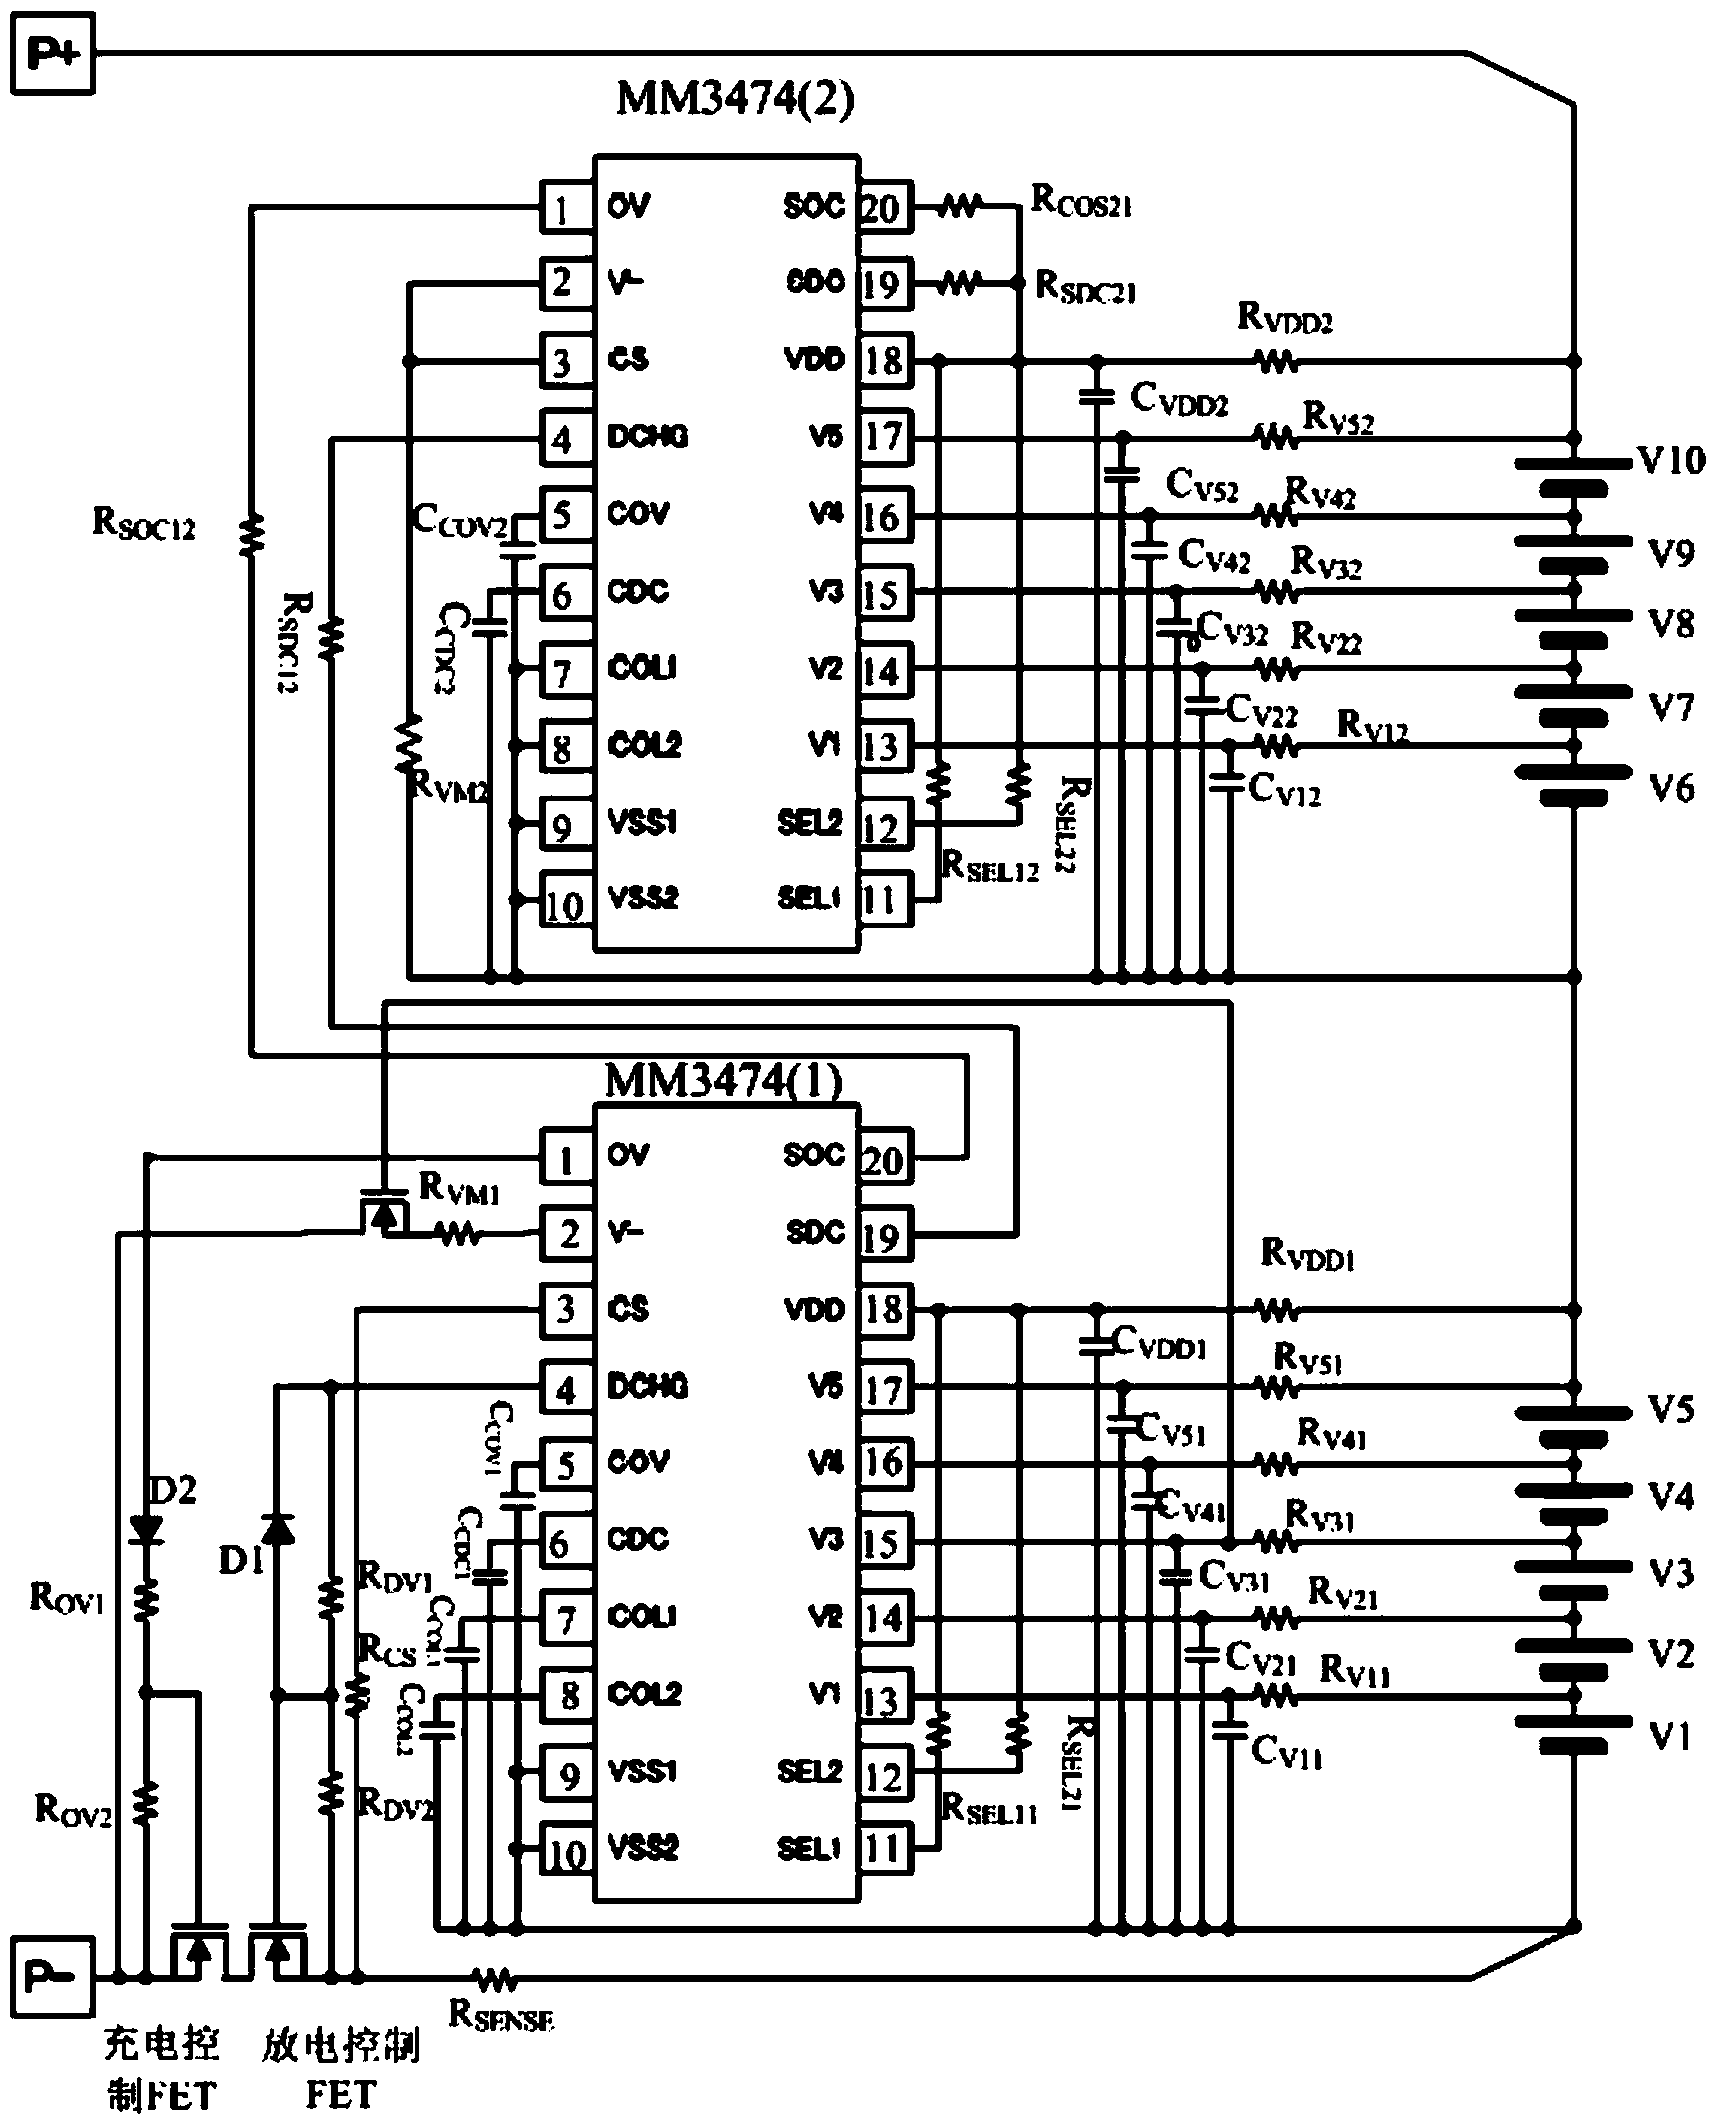 Battery protection-used chip cascade structure